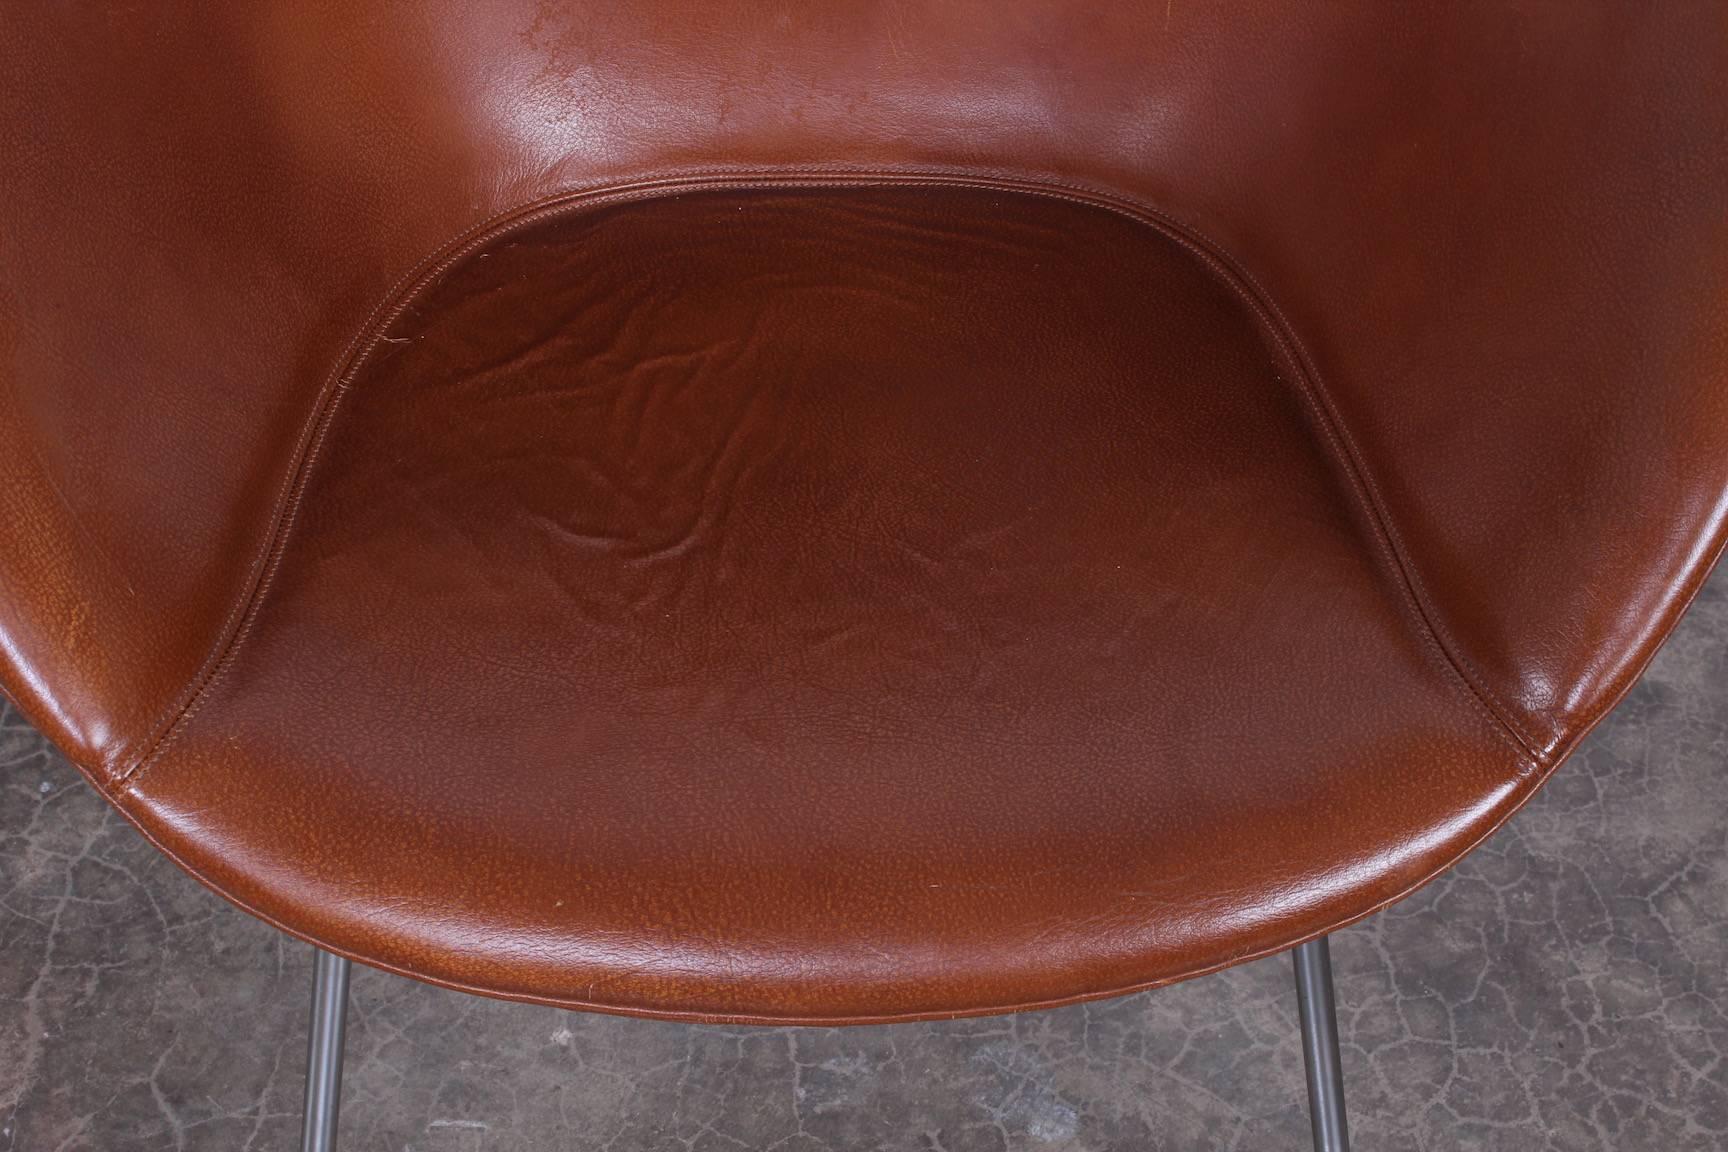 Arne Jacobsen Pot Chairs in Original Leather 7